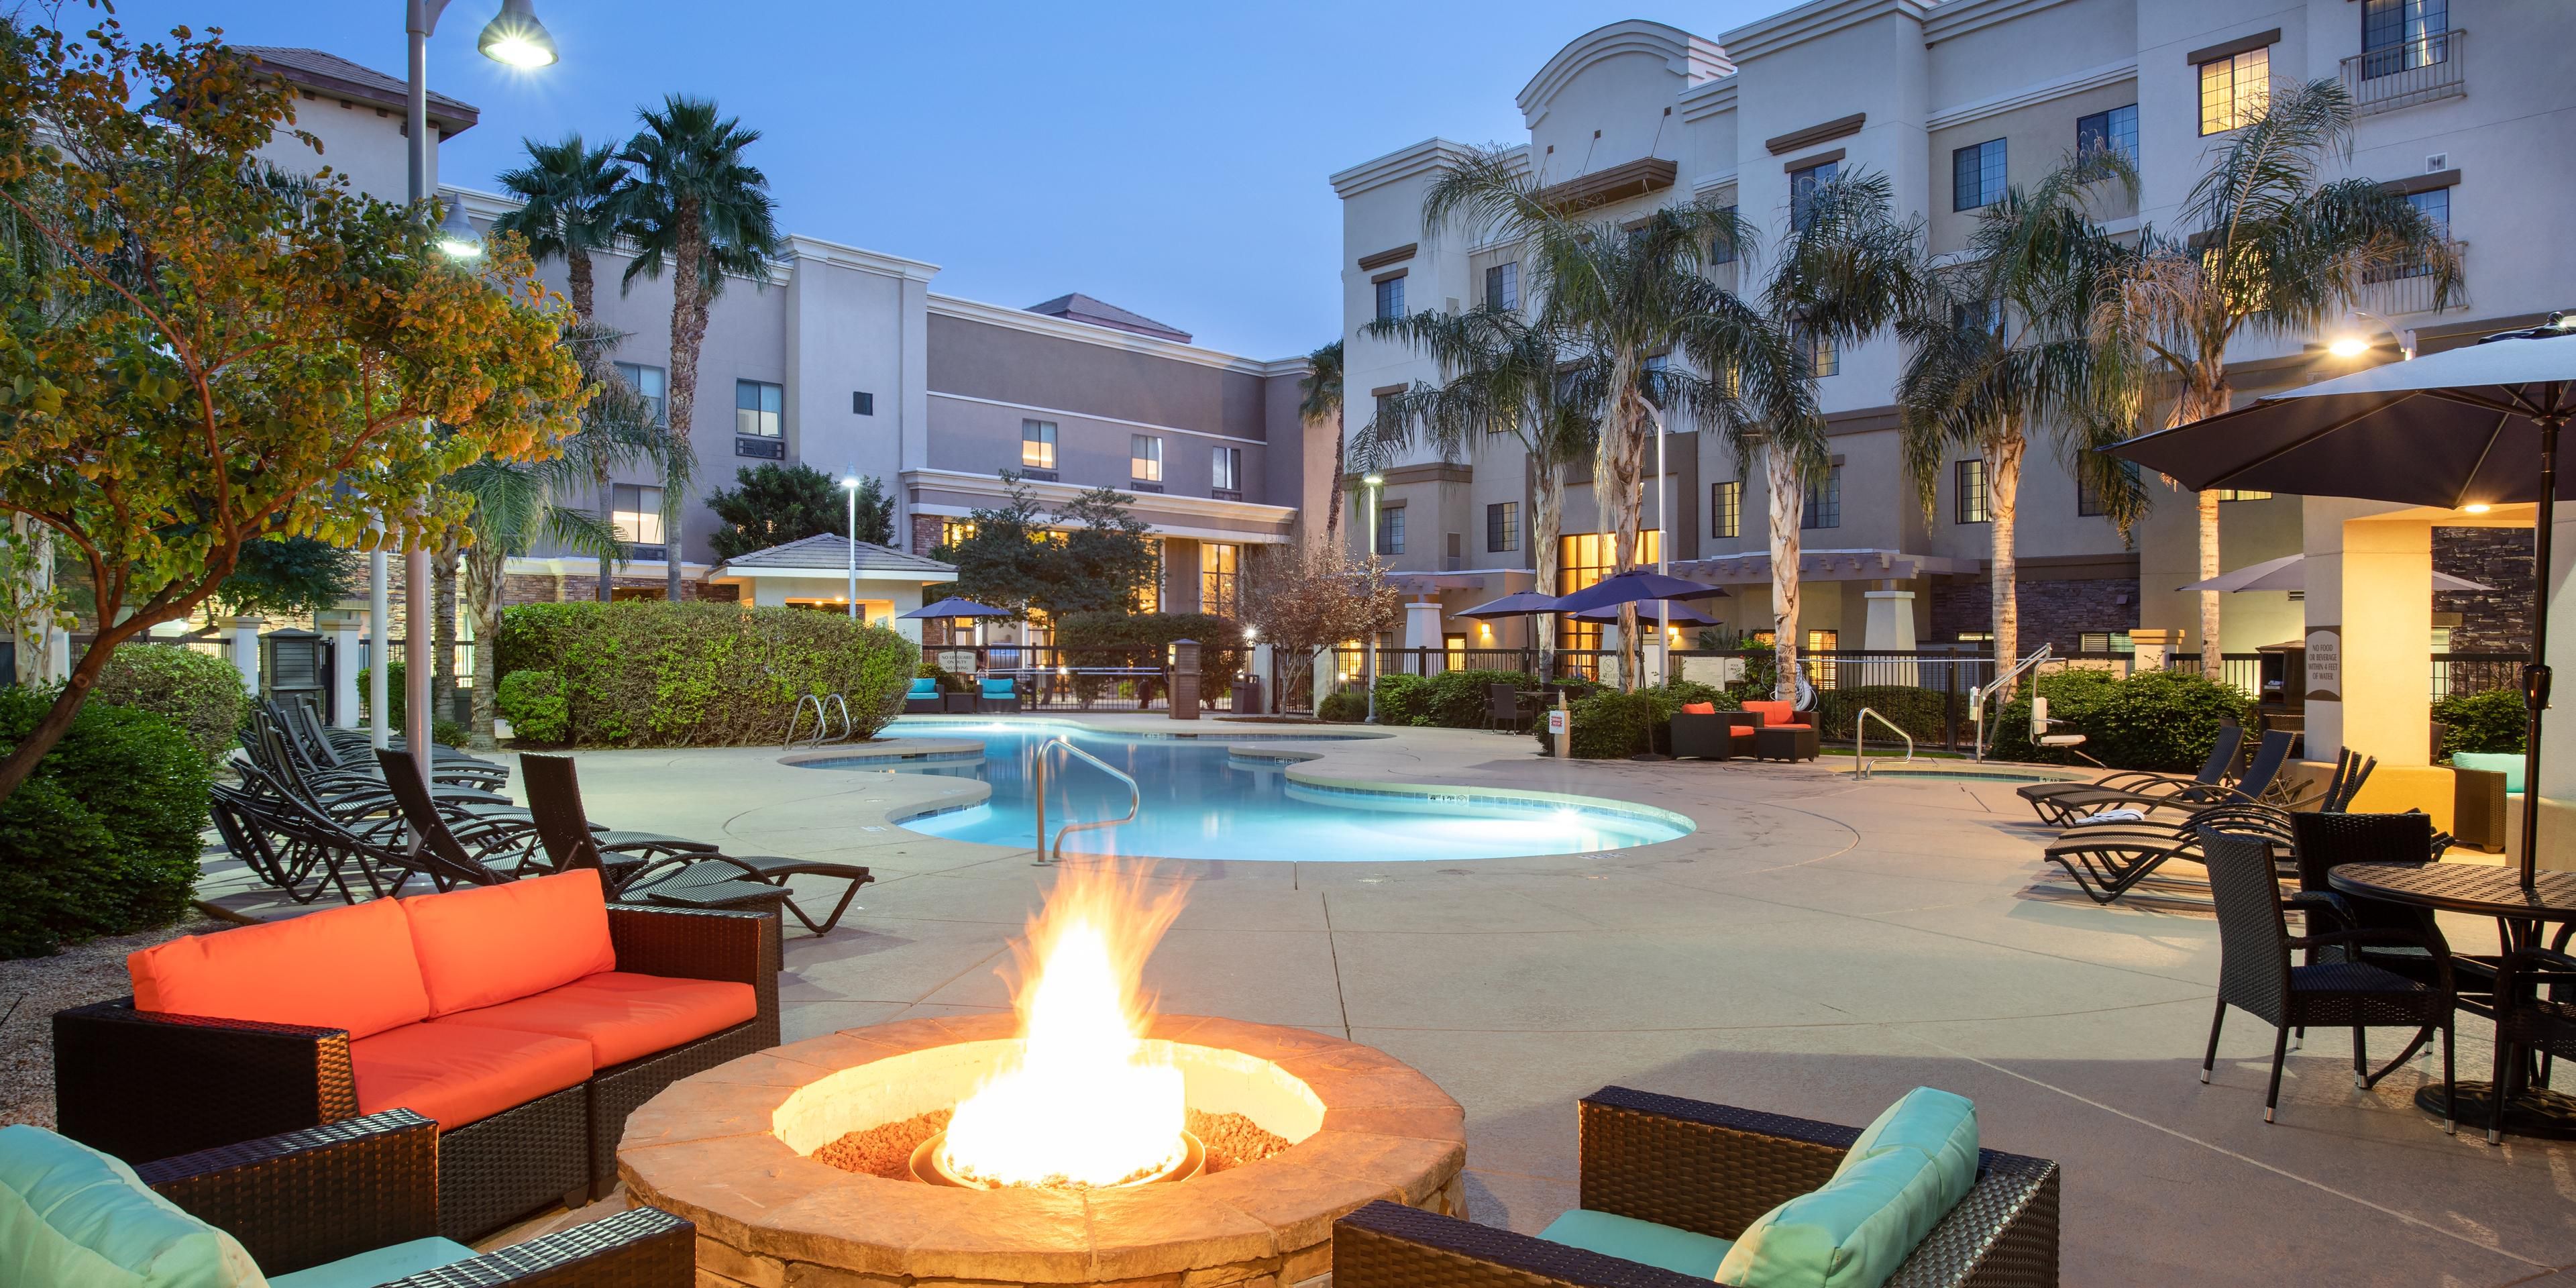 Our heated outdoor pool with whirlpool and fire pits are here to help you feel like you are at a resort. Come play and relax with us under the sunny Phoenix sun. 